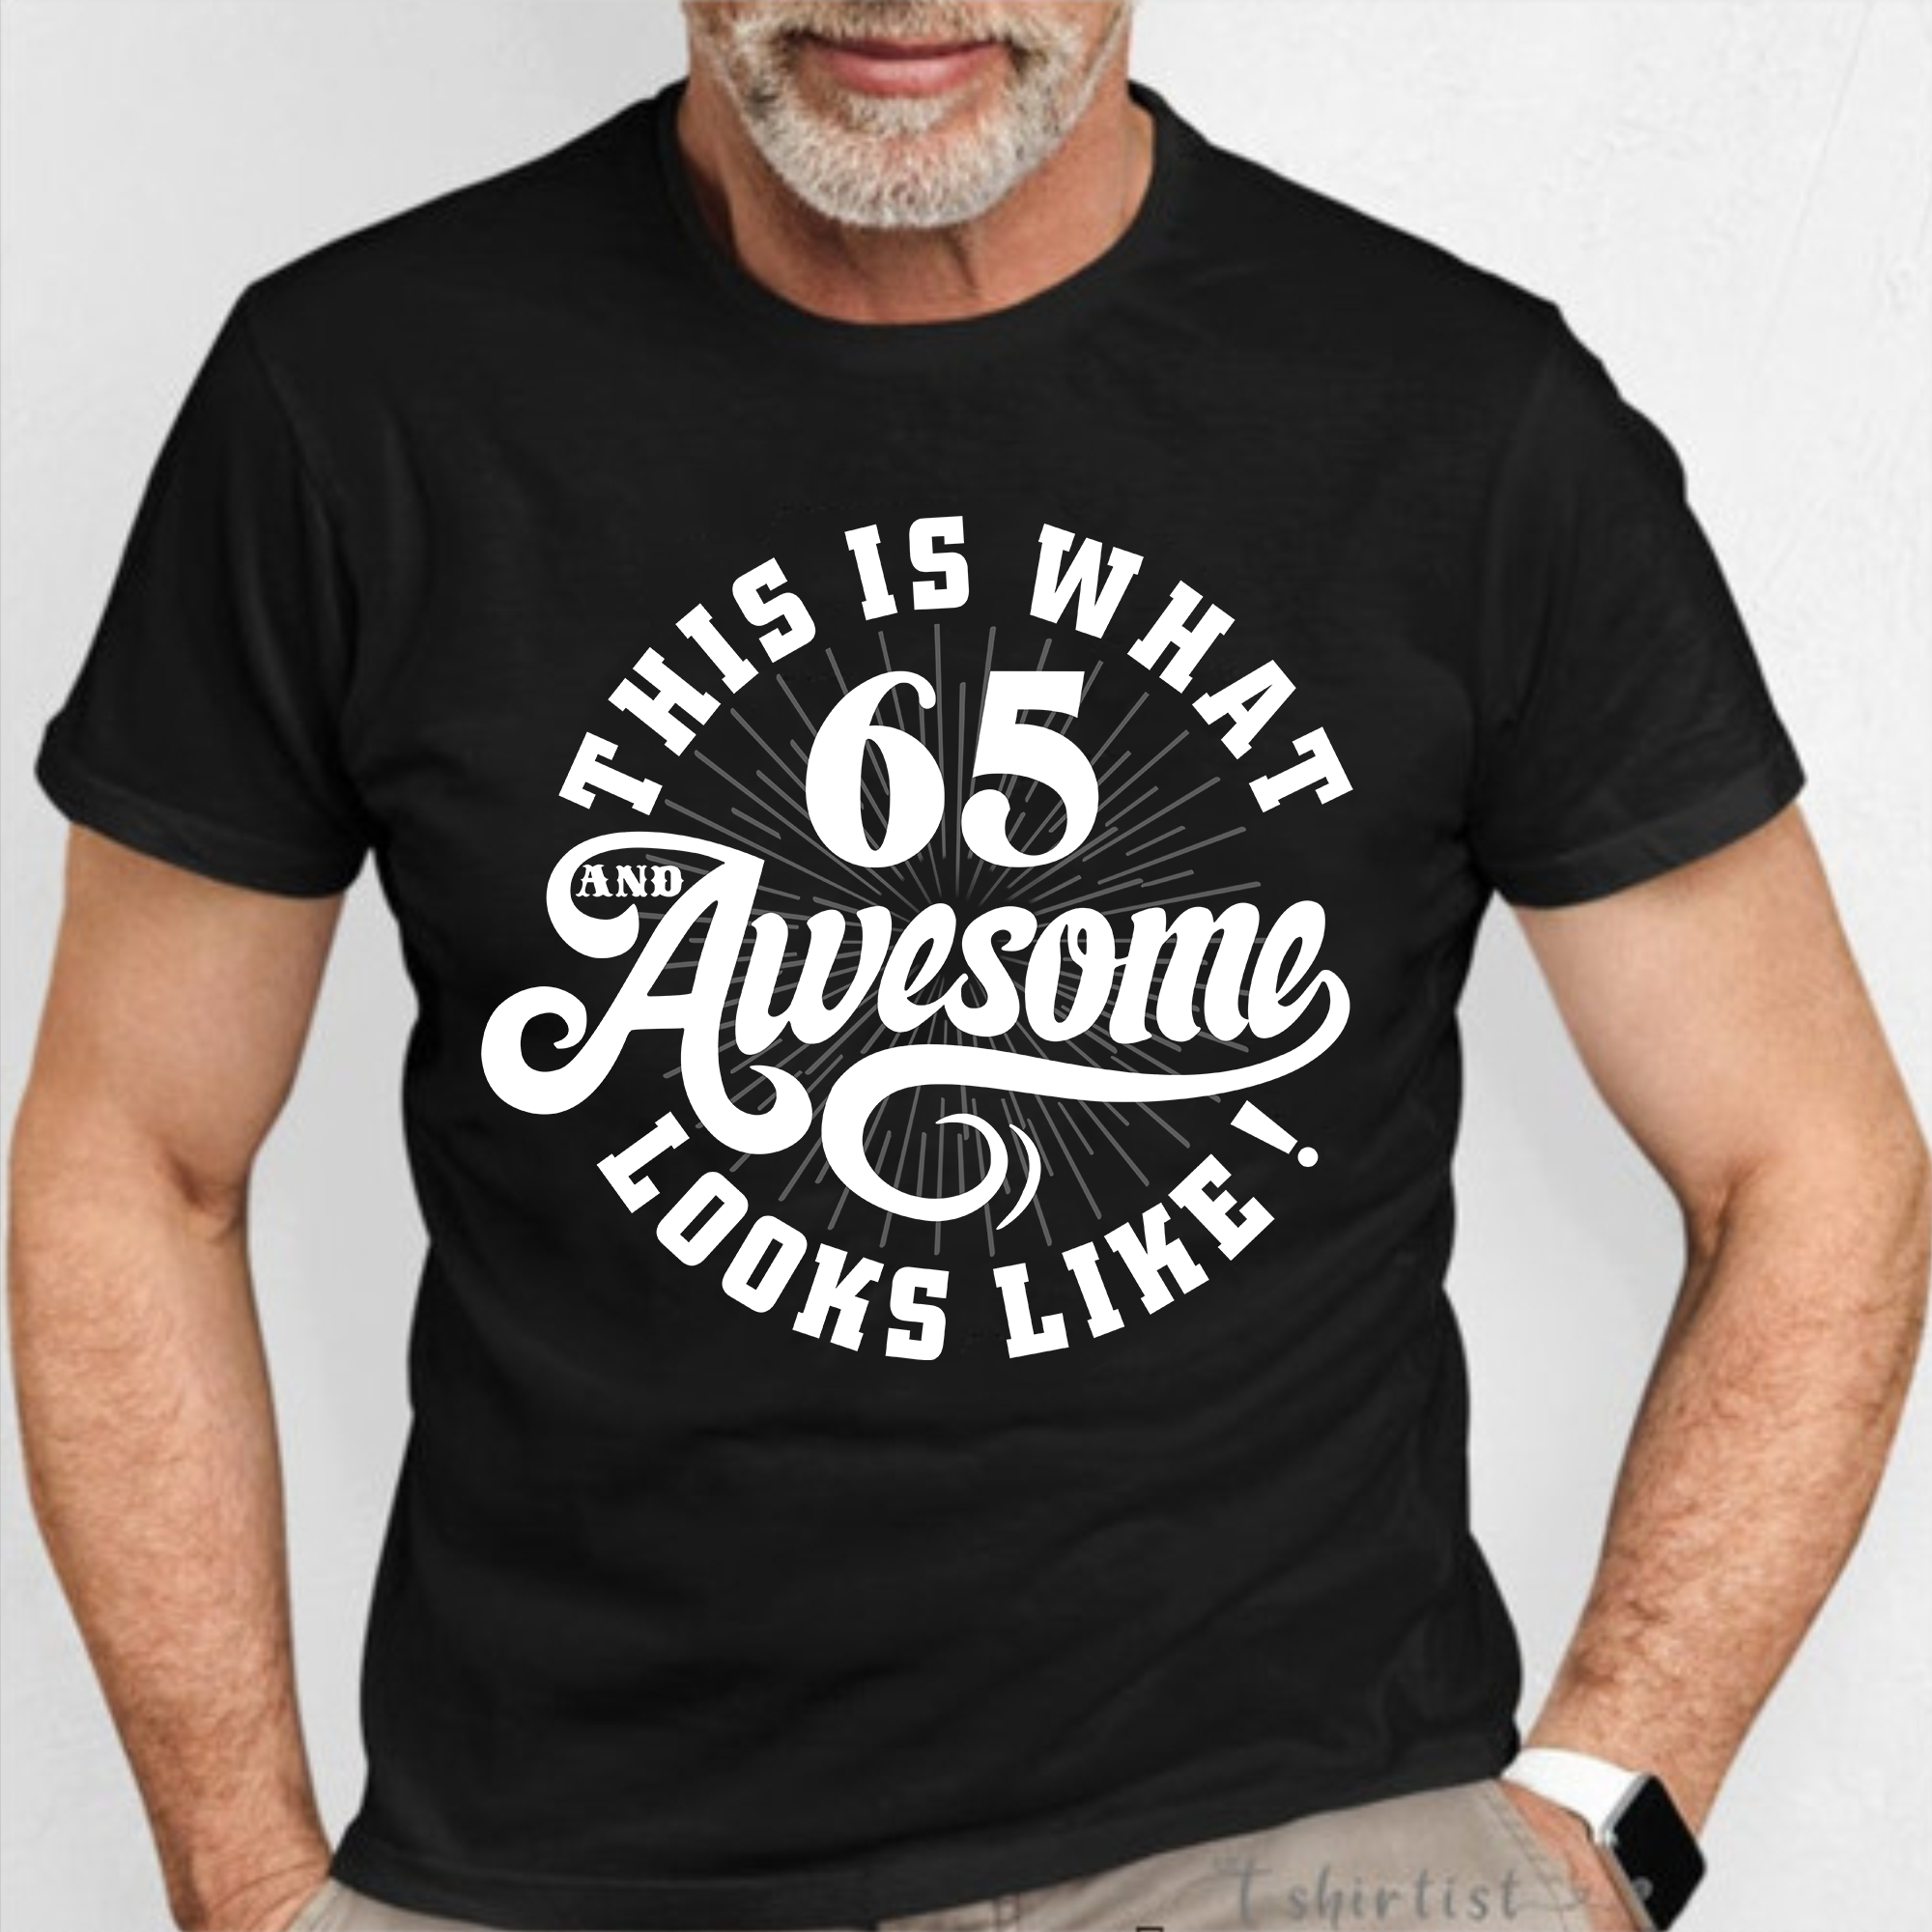 This Is What 65 Awesome Looks Like – Happy 65th Birthday Shirt